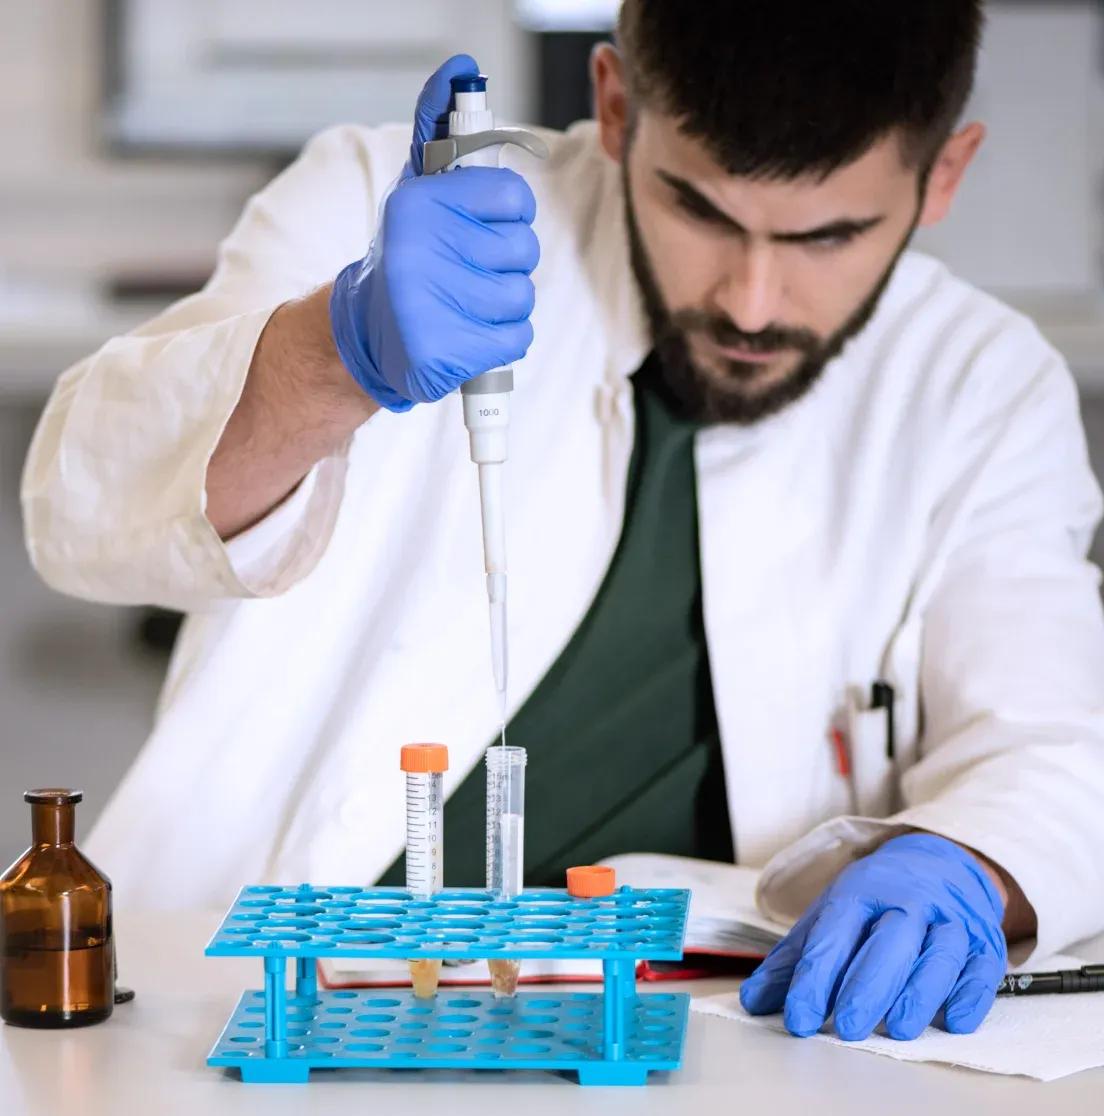 Sample Control employee taking samples in laboratory